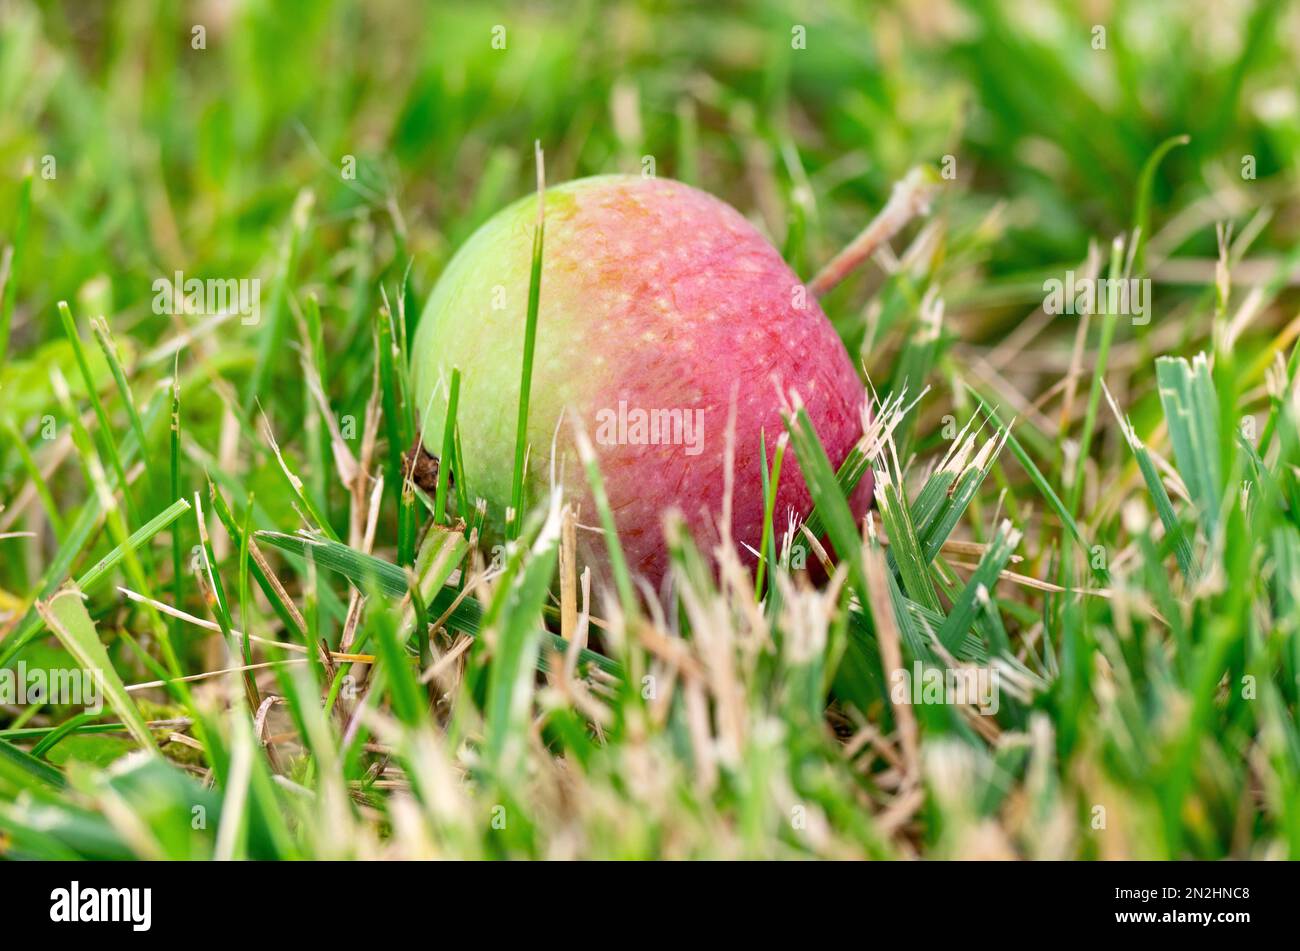 Fresh young apple on cut grass close-up in the garden. Stock Photo